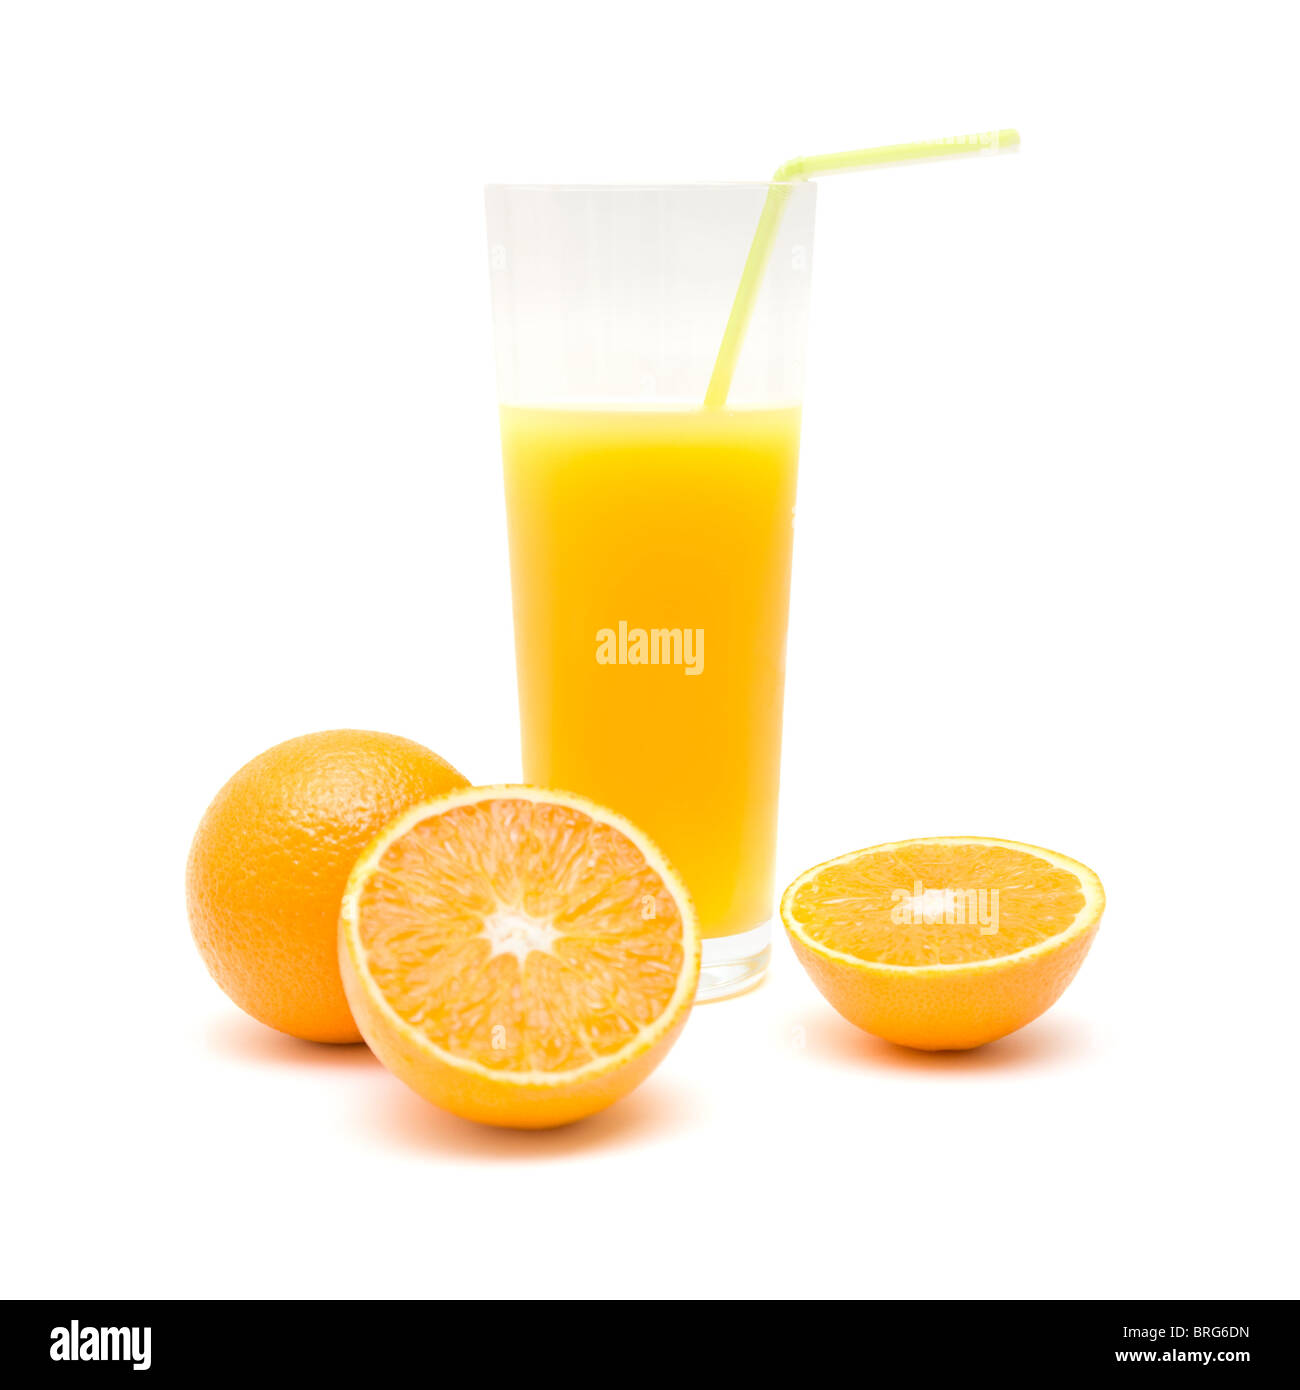 whole orange, ornage cut in half and a glass of orange juice with a straw, isolated on white Stock Photo